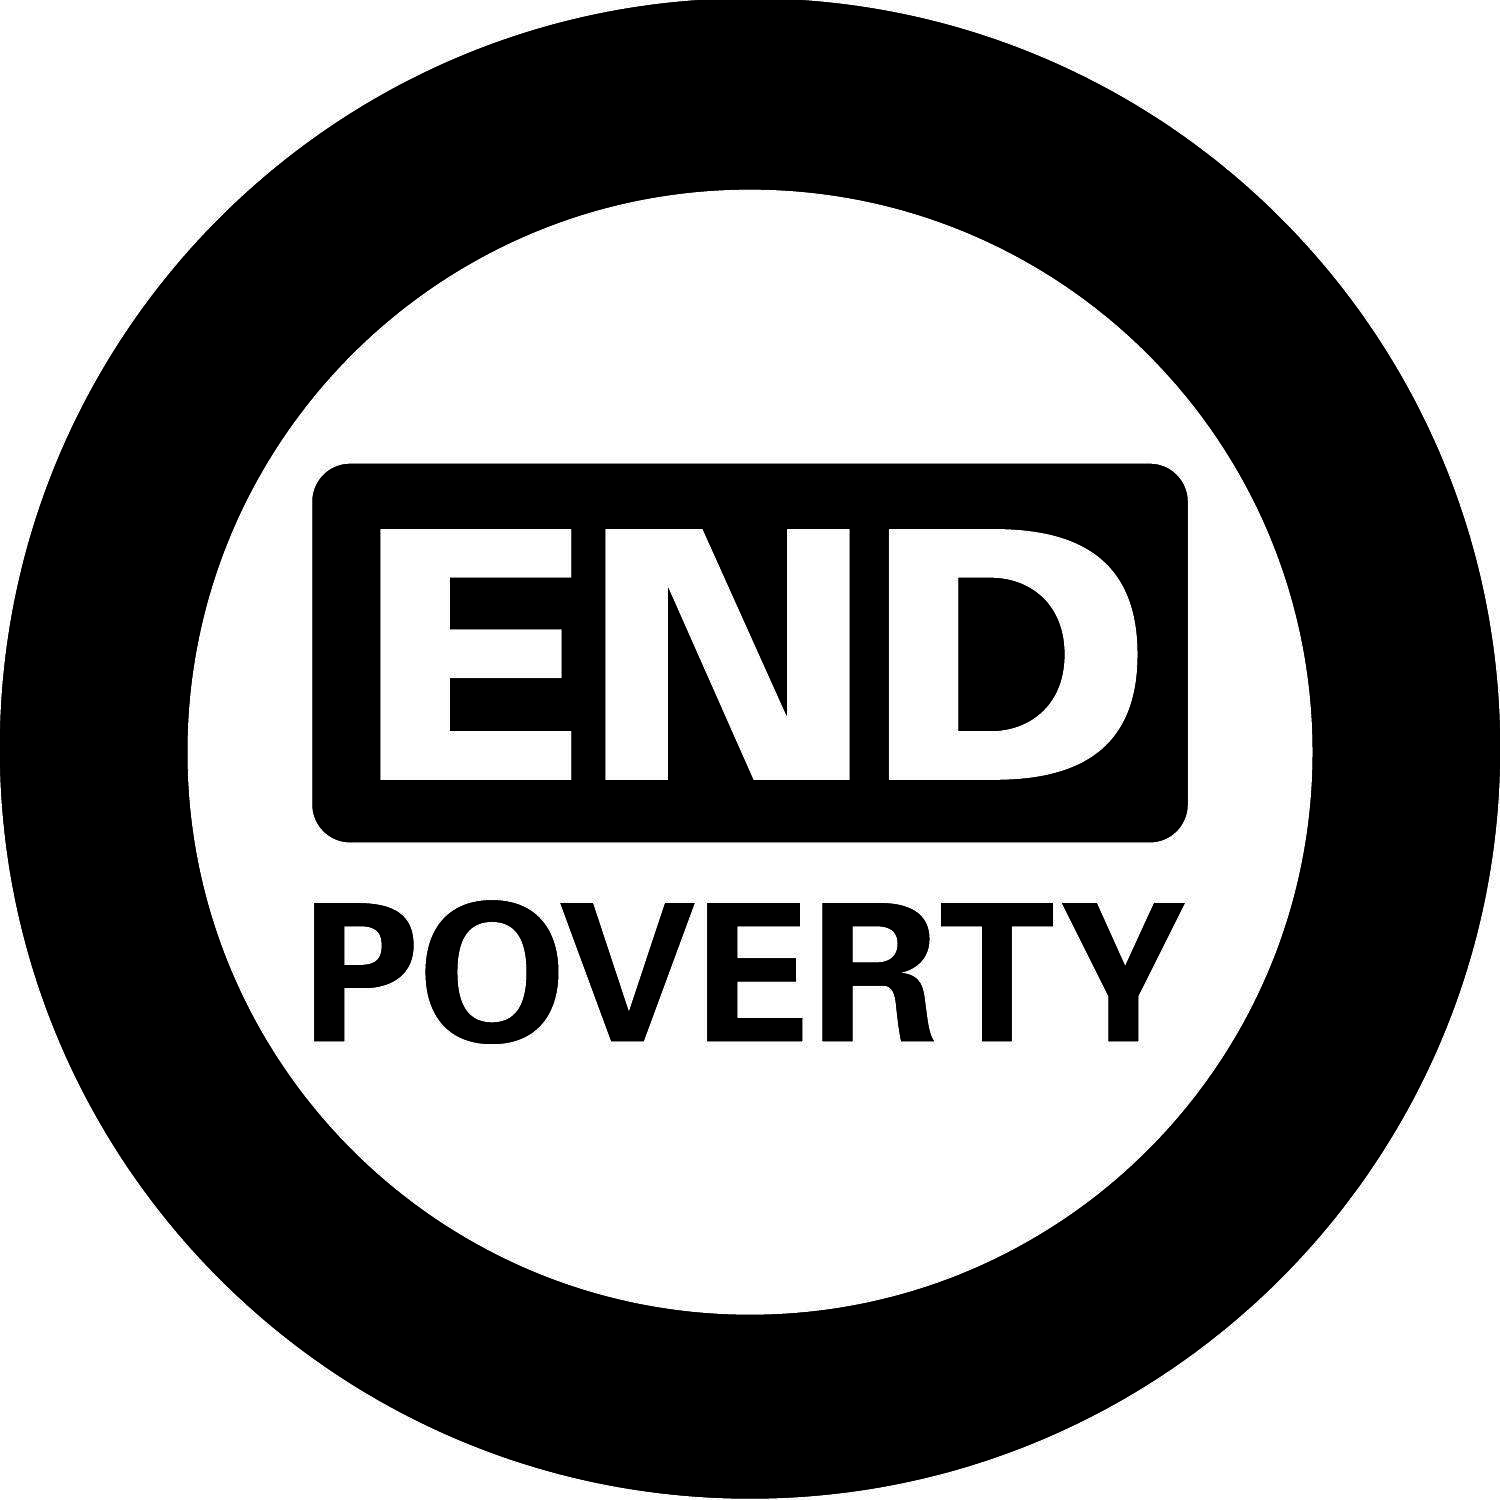 End of World Logo - Share your support today for End Poverty Day, October 17